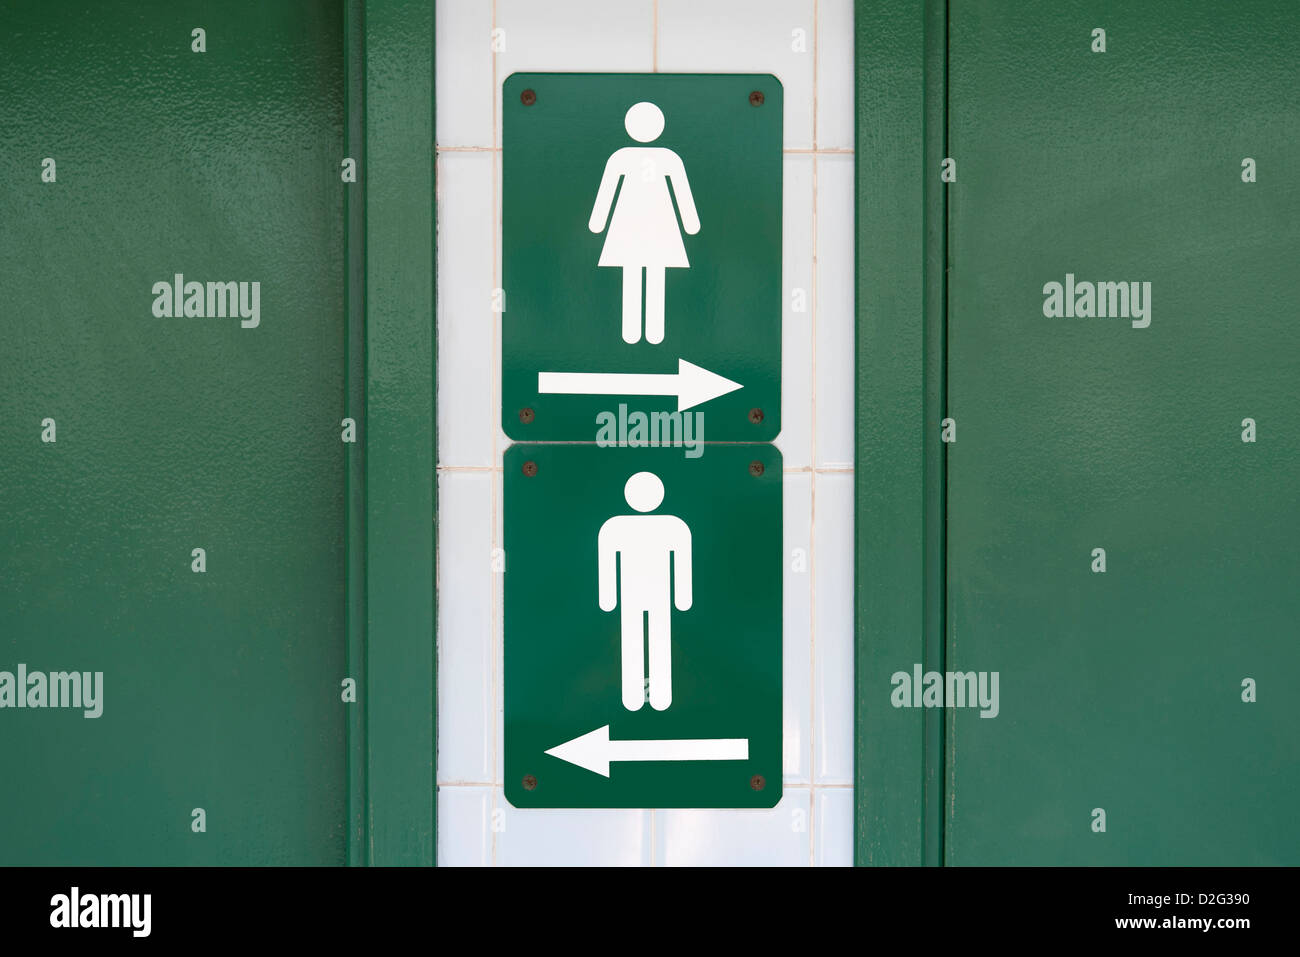 Green sign with male and female symbols directed to go in opposite directions Stock Photo